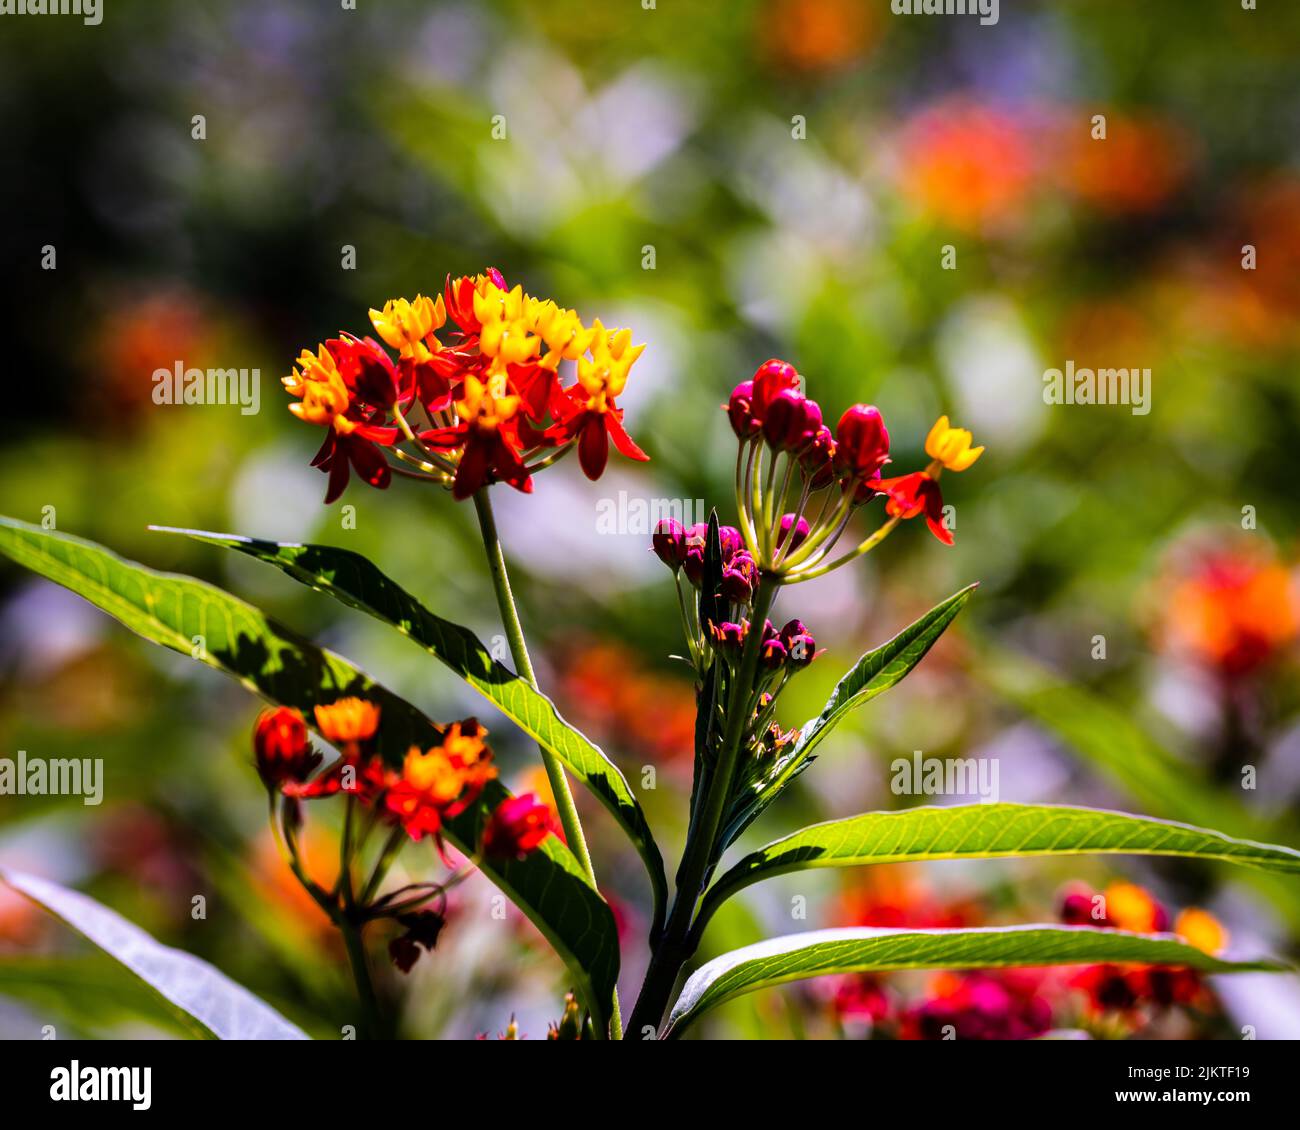 A closeup shot of the Mexican Butterfly Weed flowers in Rutgers Gardens, New Brunswick, New Jersey, United States Stock Photo